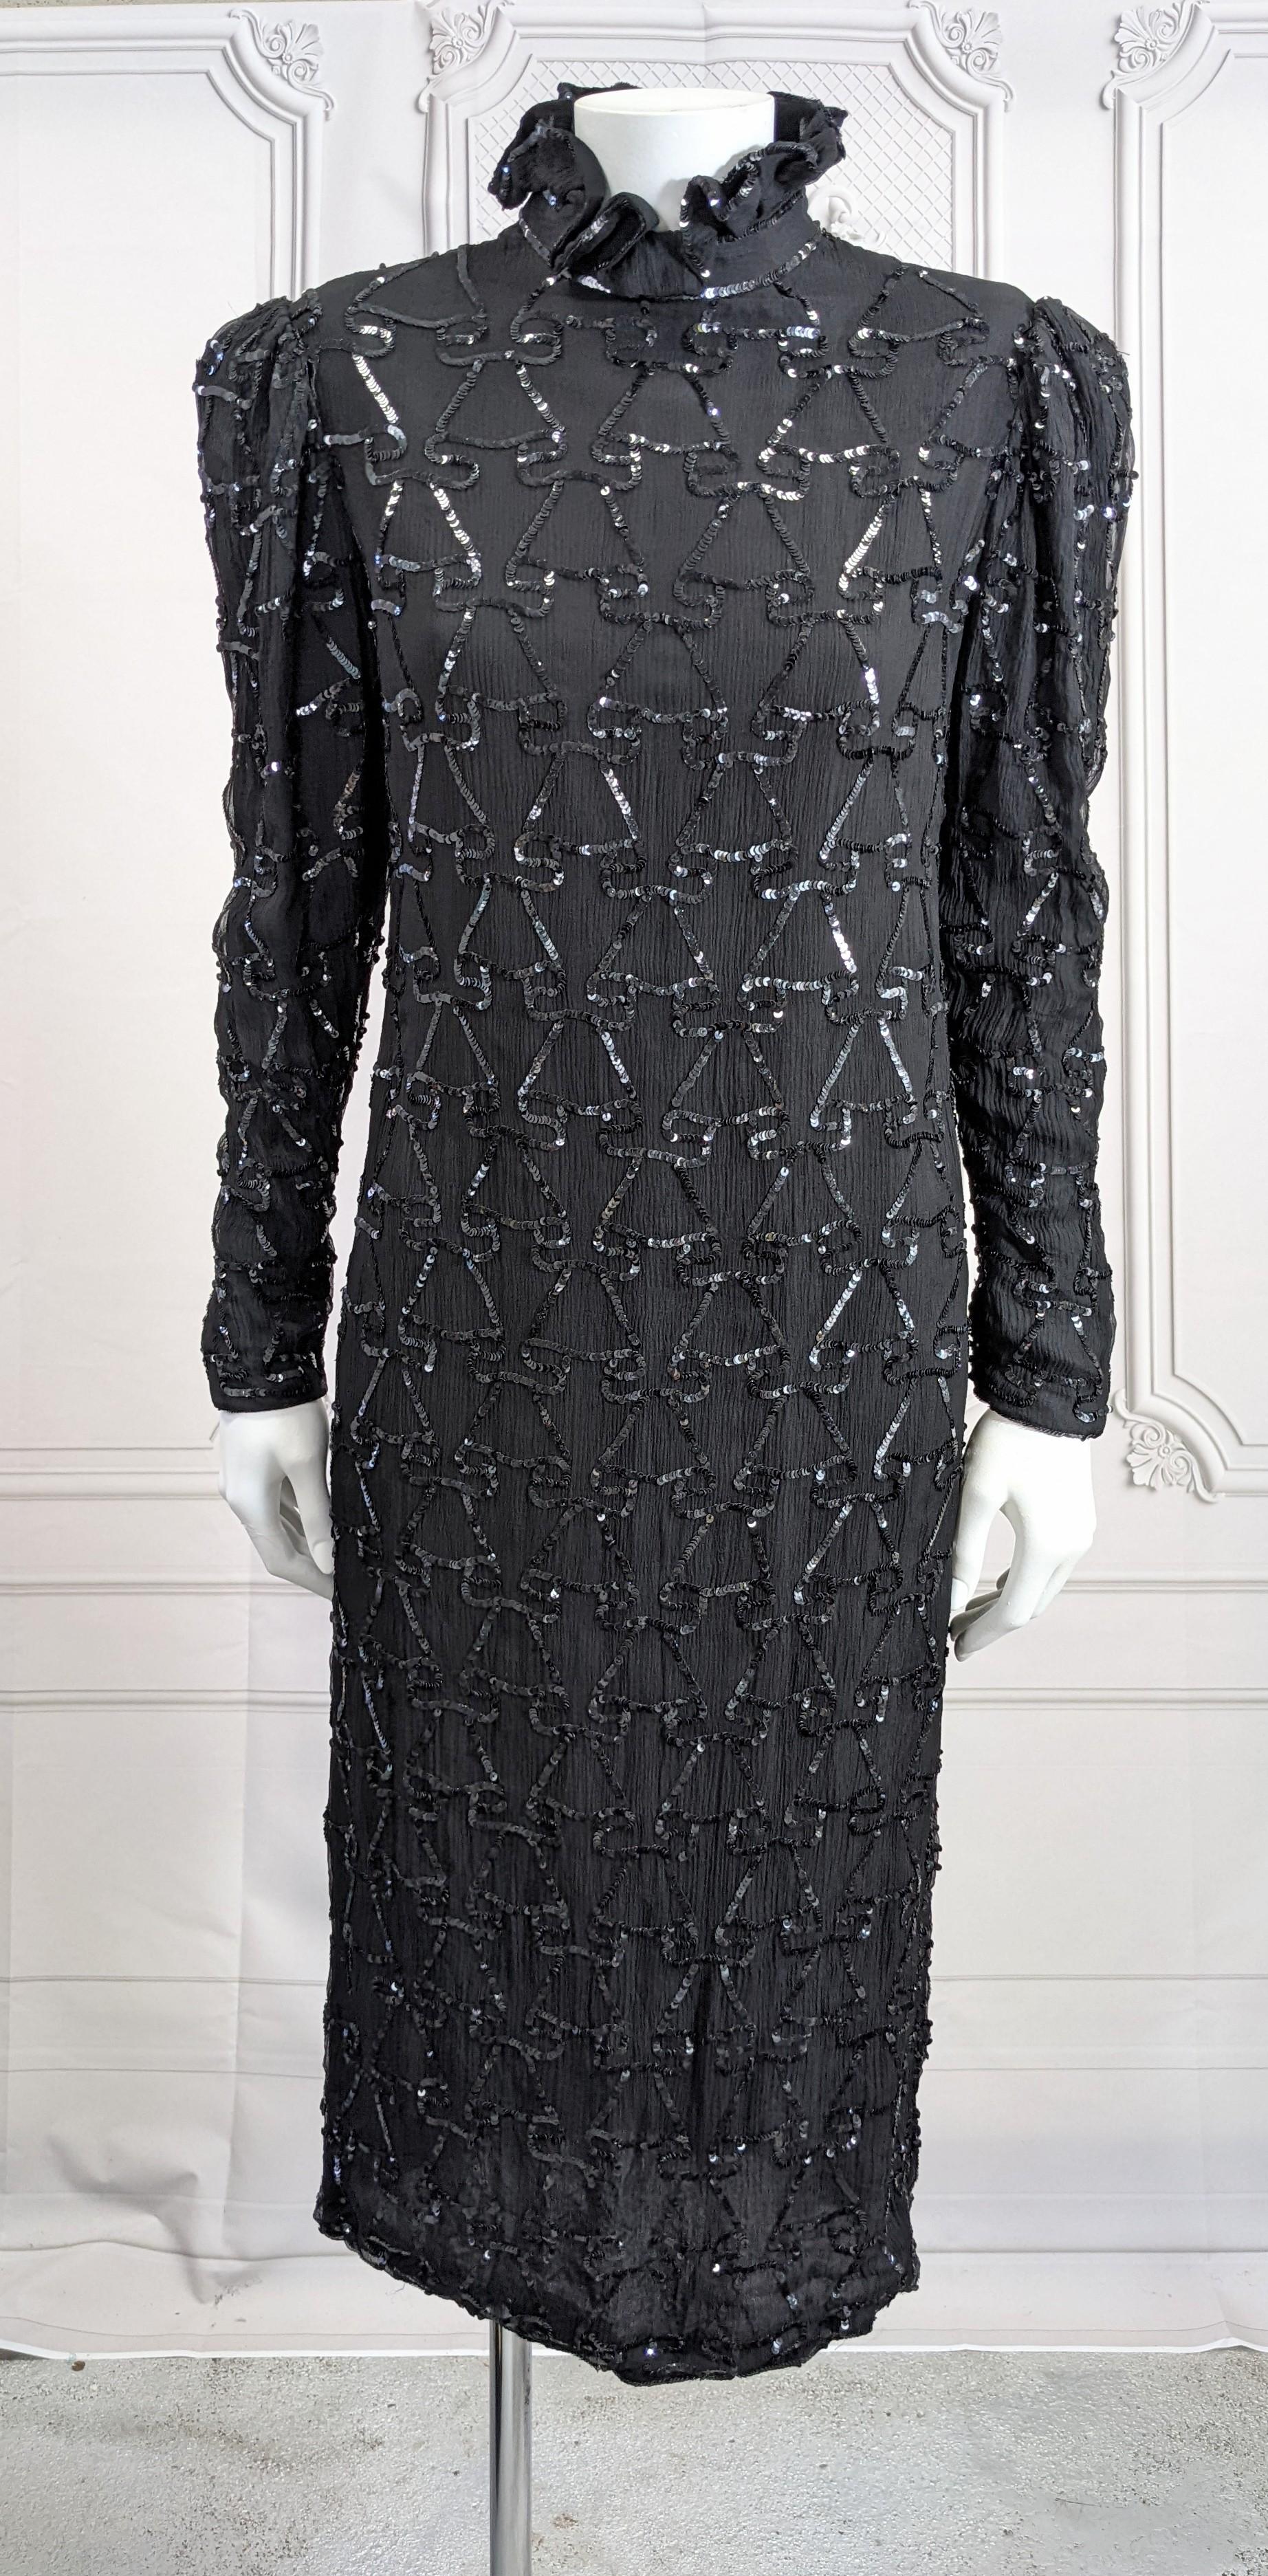 Elegant Silk Chiffon Sequin Ruffle Dress made for Saks Fifth Ave. Simple sheath shape with puffy sleeves and tight ruffled collar, all sequined with a folded ruffle pattern. 
A very timeless shape with a tight high collar. Collar is quite small.